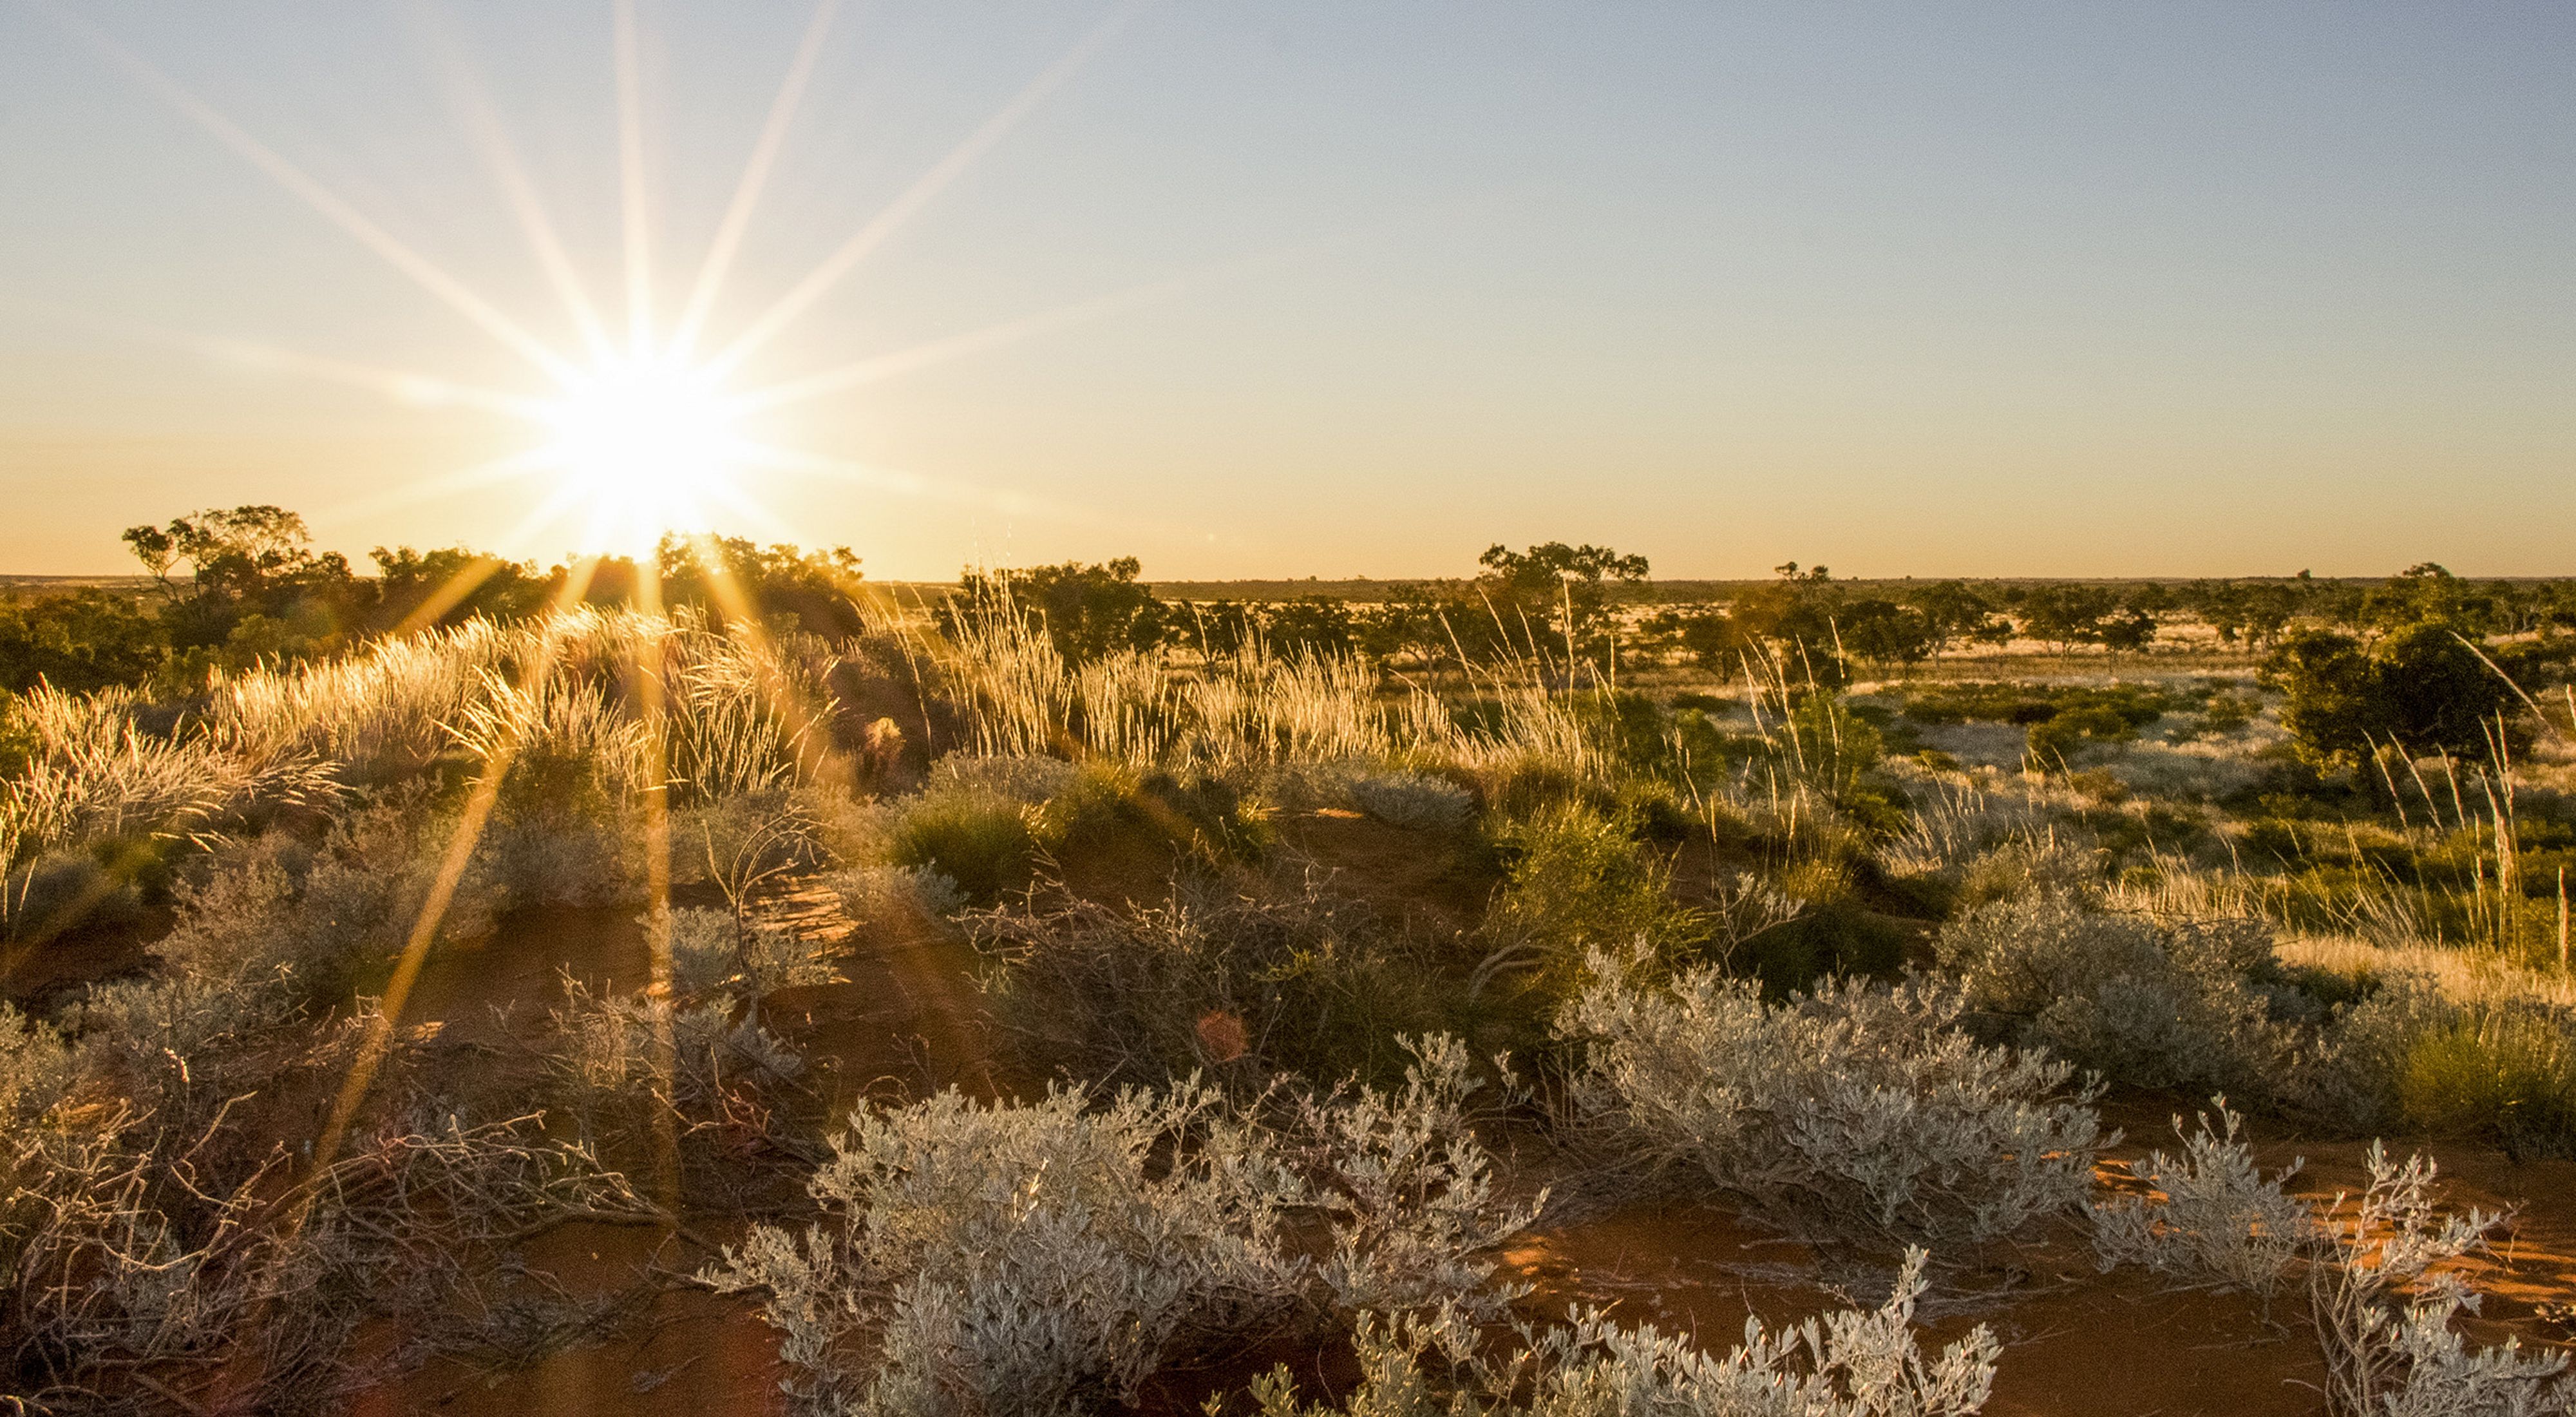 The sun sets over the sand dunes and shrubs of Martu country, Western Australia.